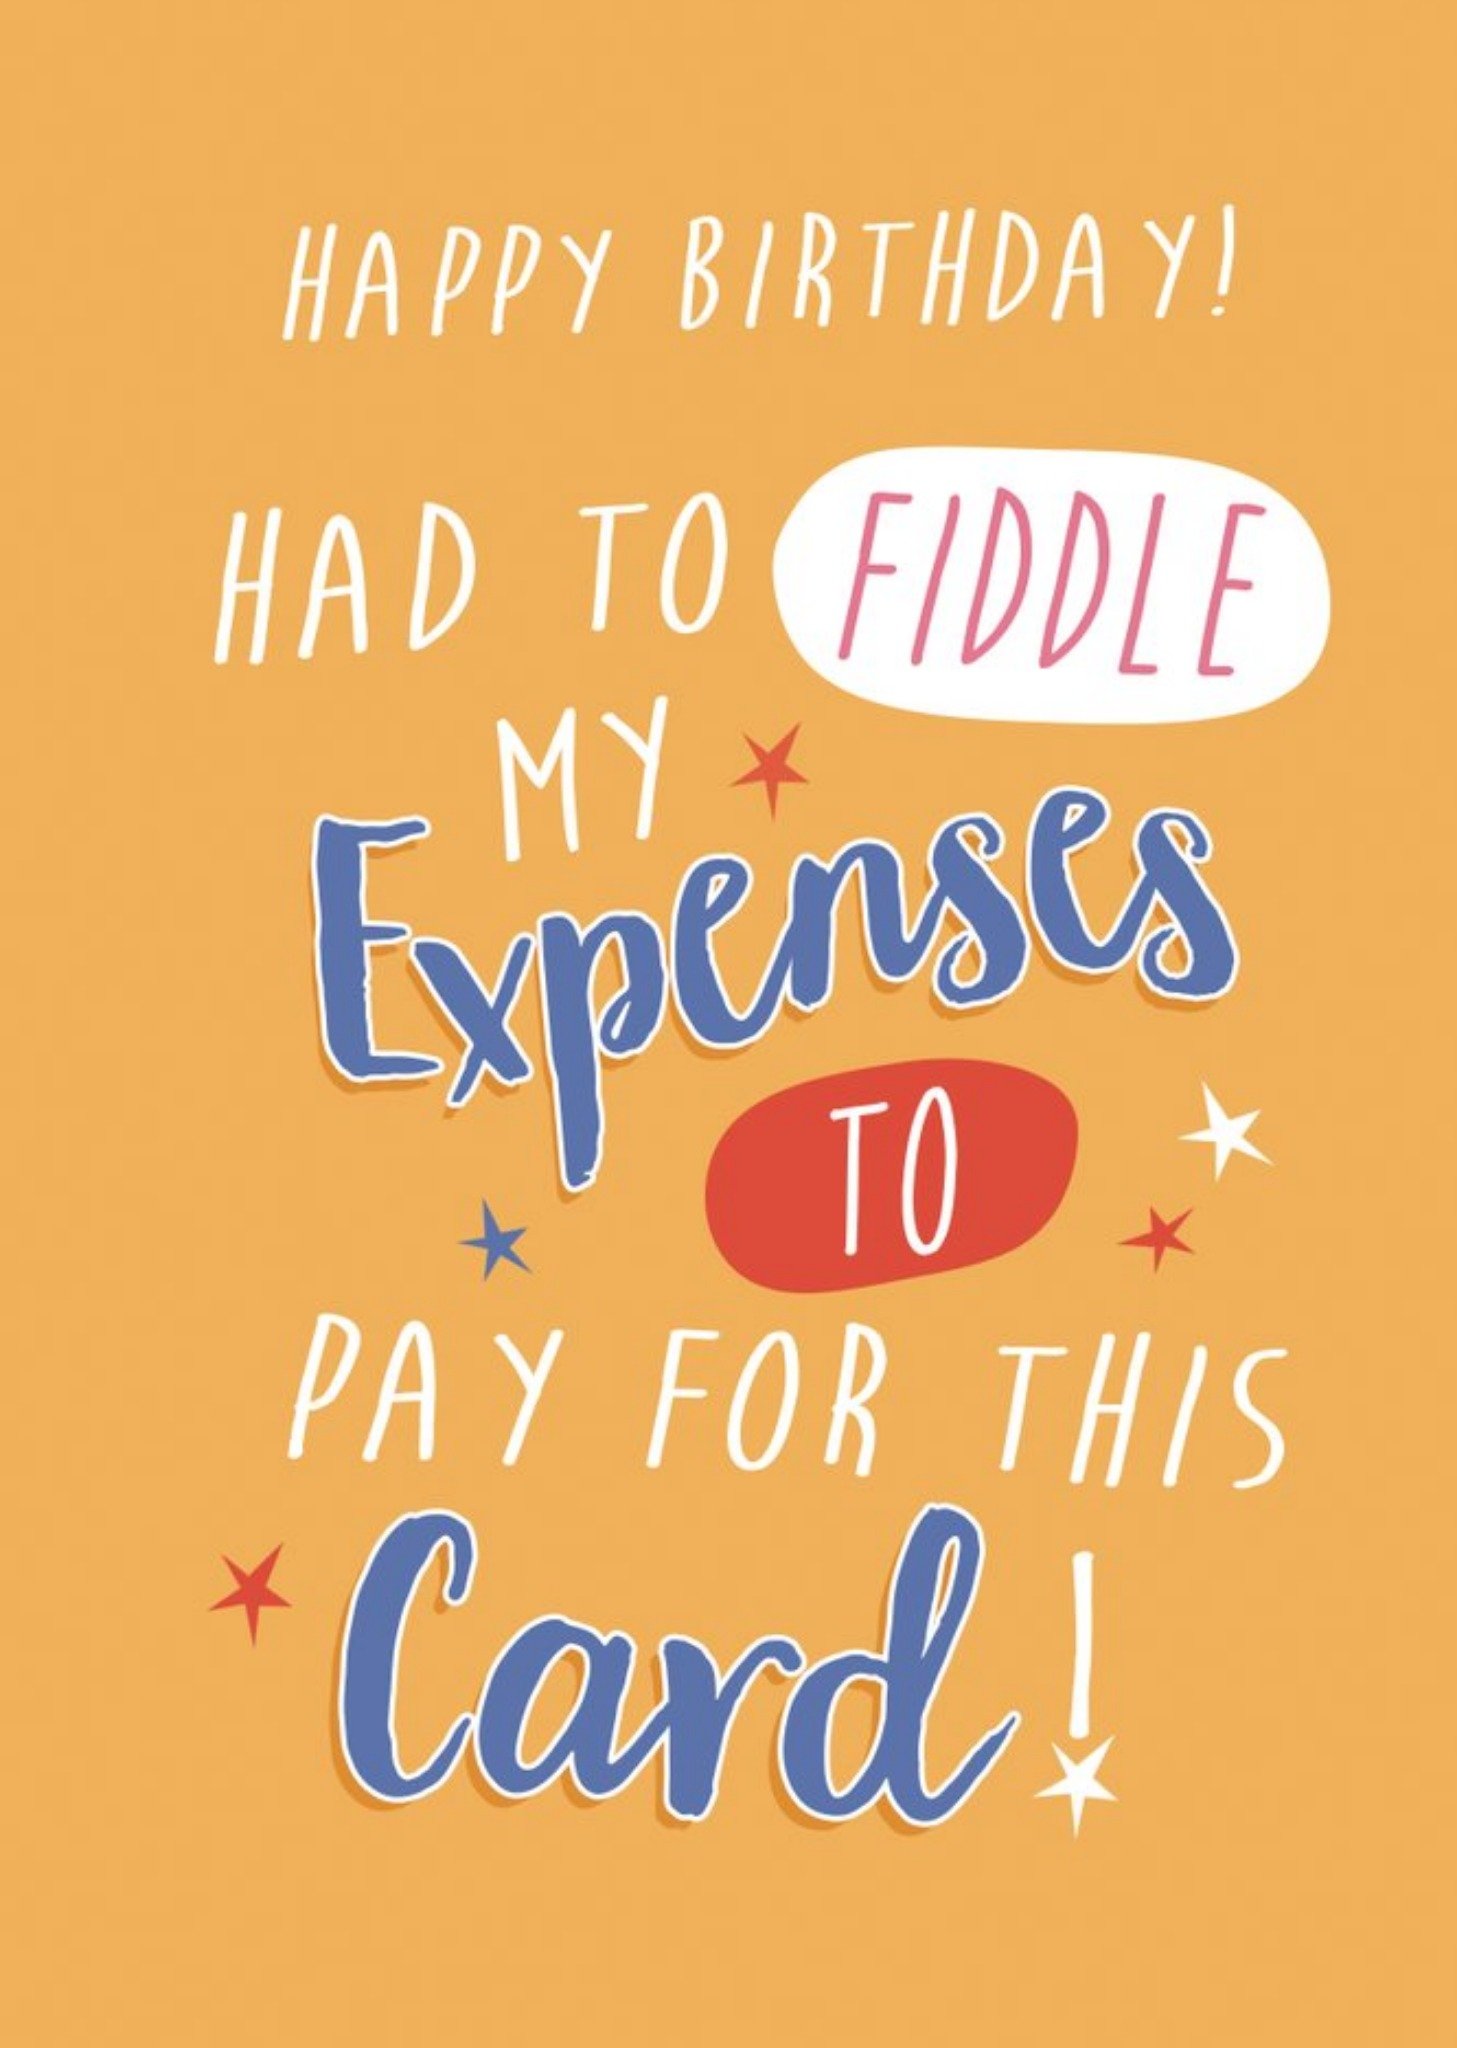 Moonpig Fiddle Of Expenses To Pay For This Card Ecard